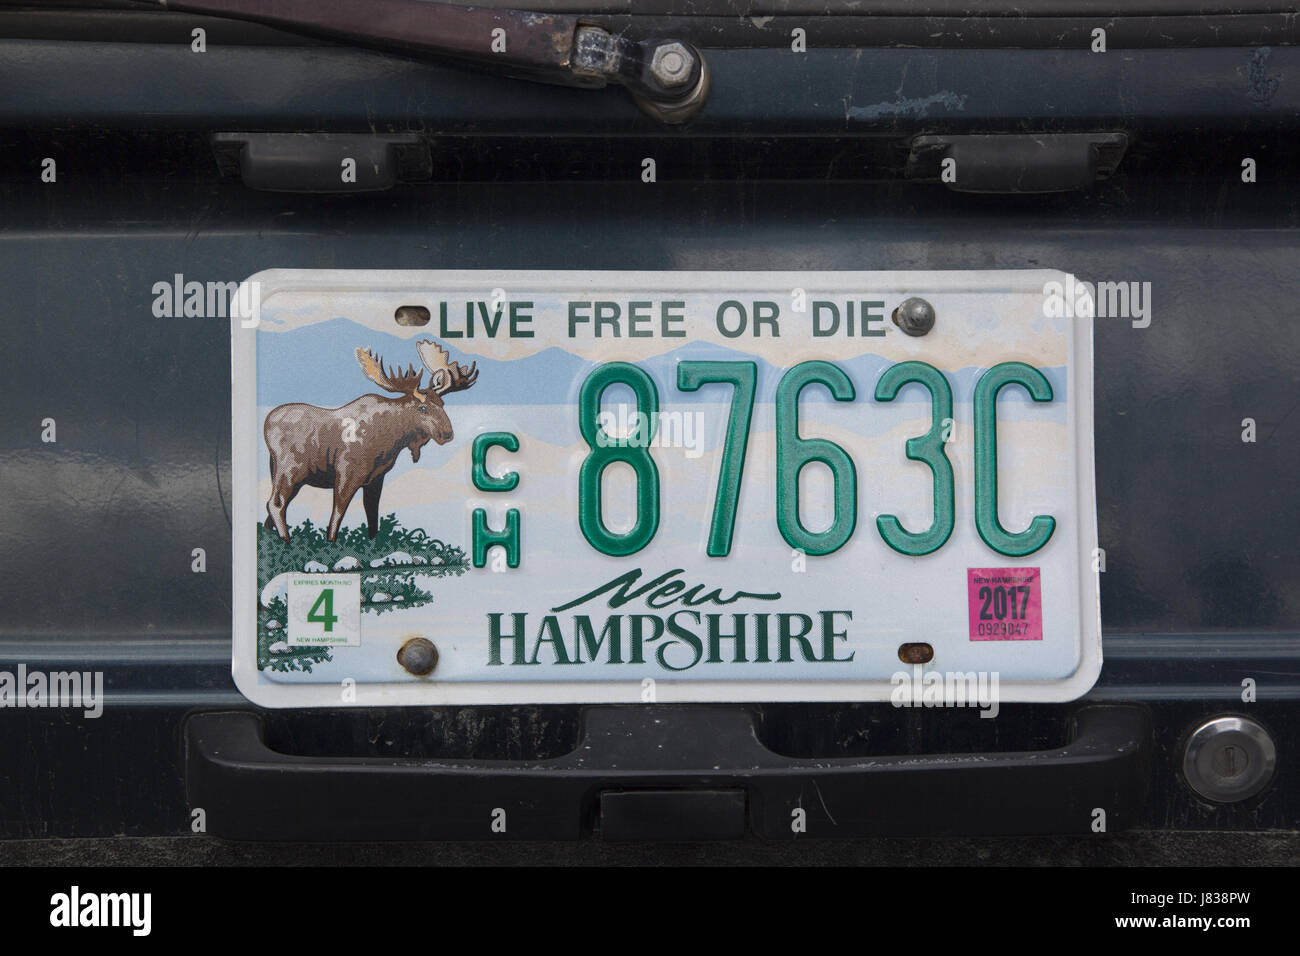 New Hampshire, USA car license plate expressing the motto 'Live Free Or Die' Stock Photo